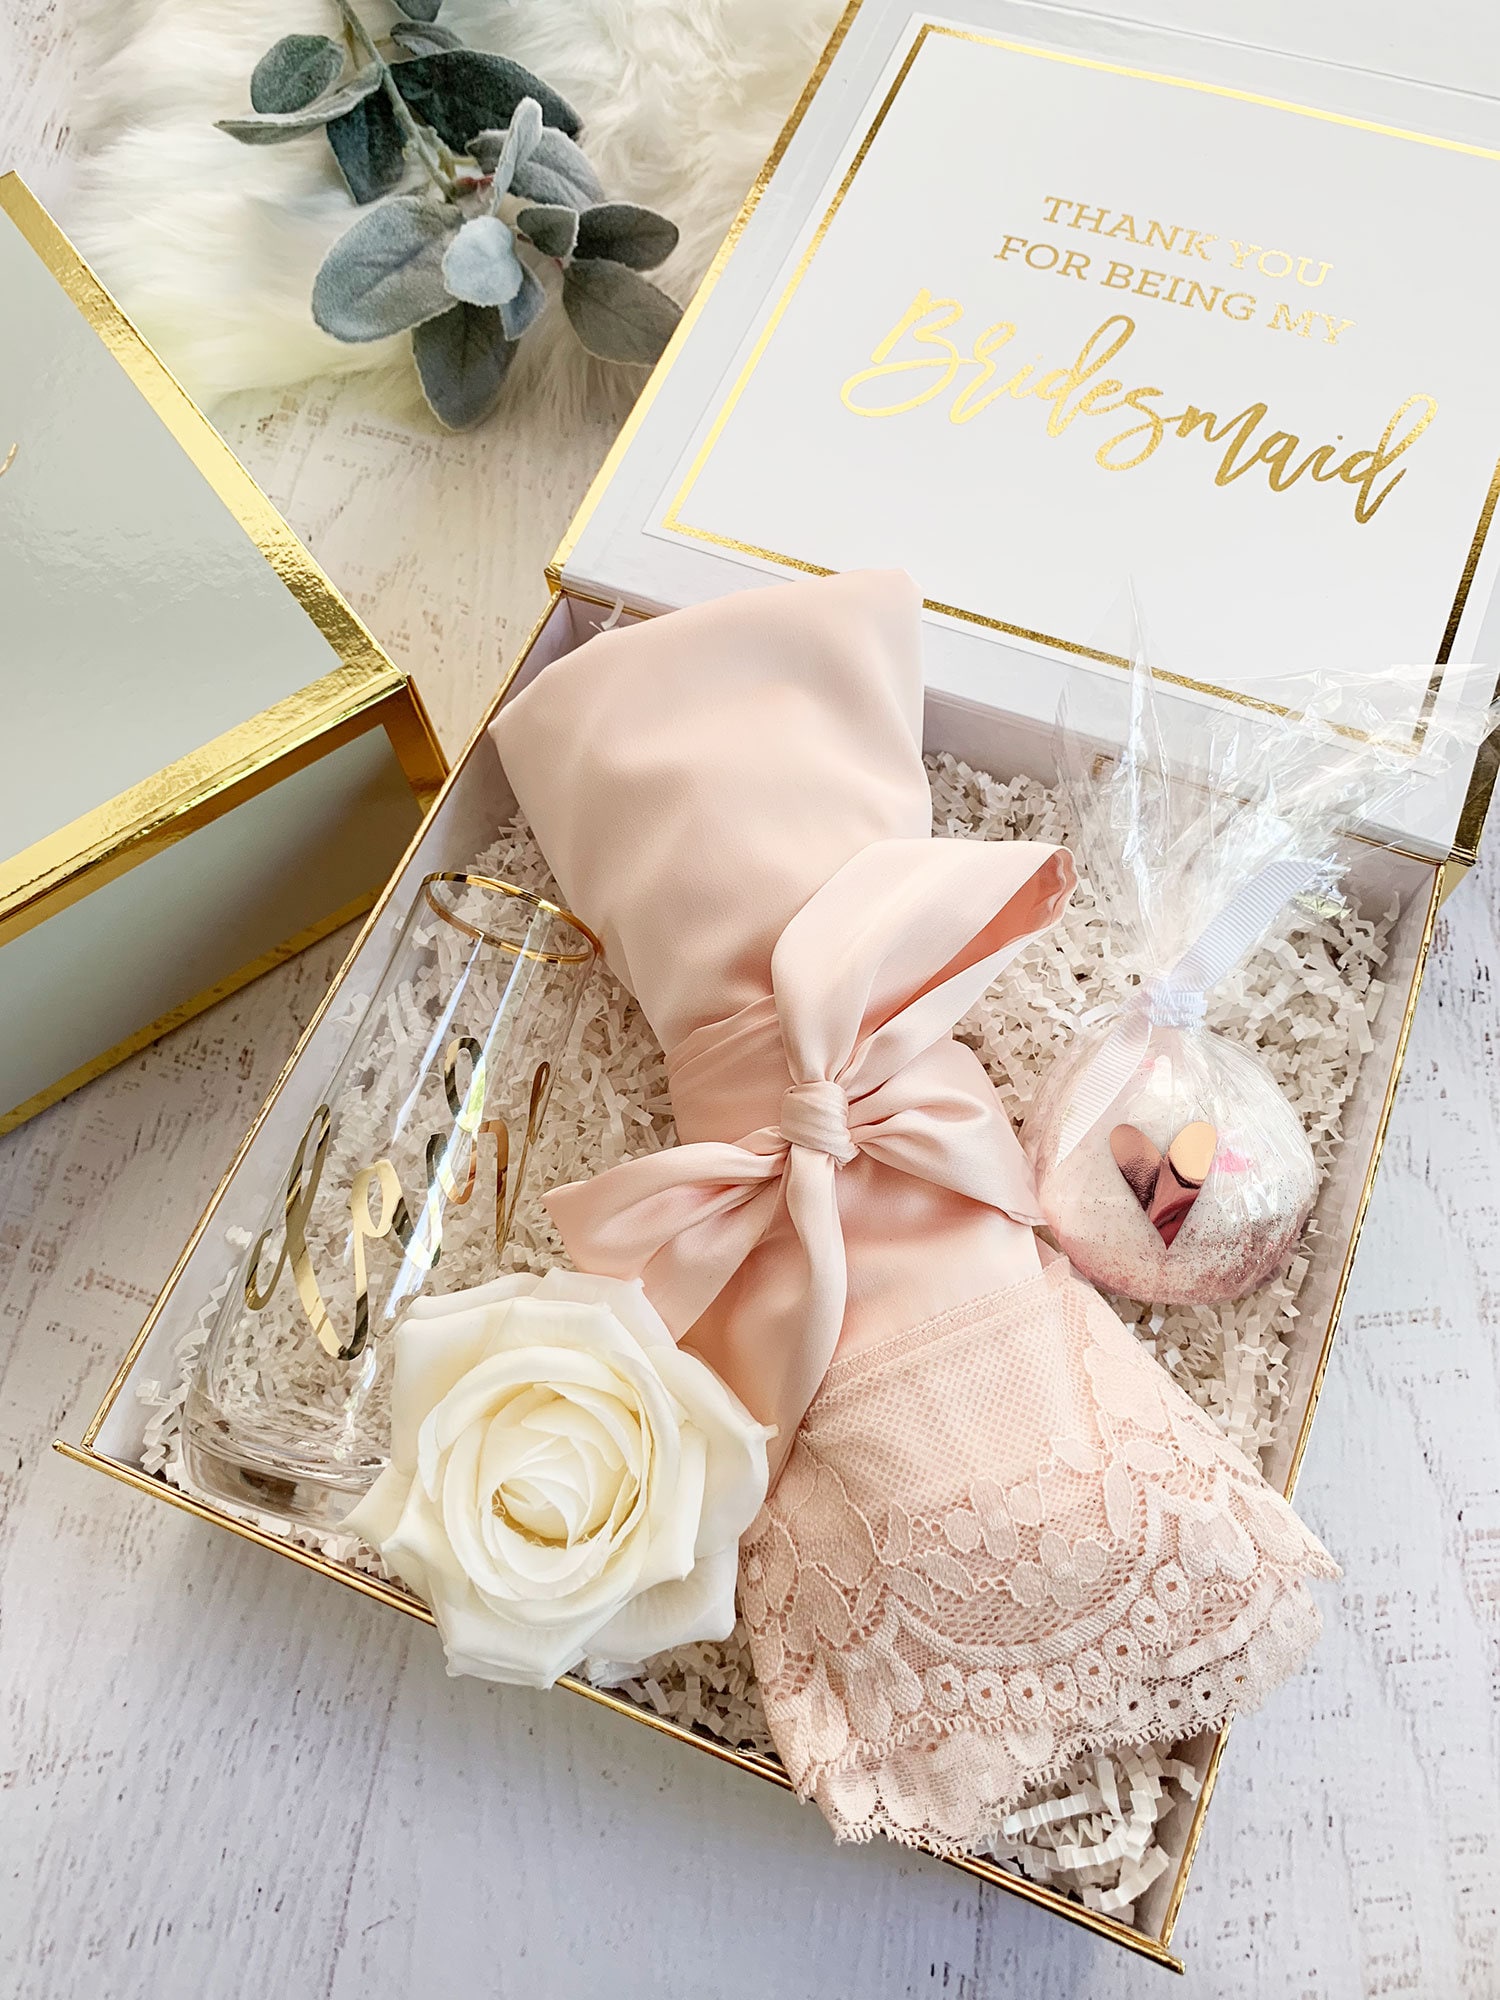 bridal shower gift ideas - Google Search